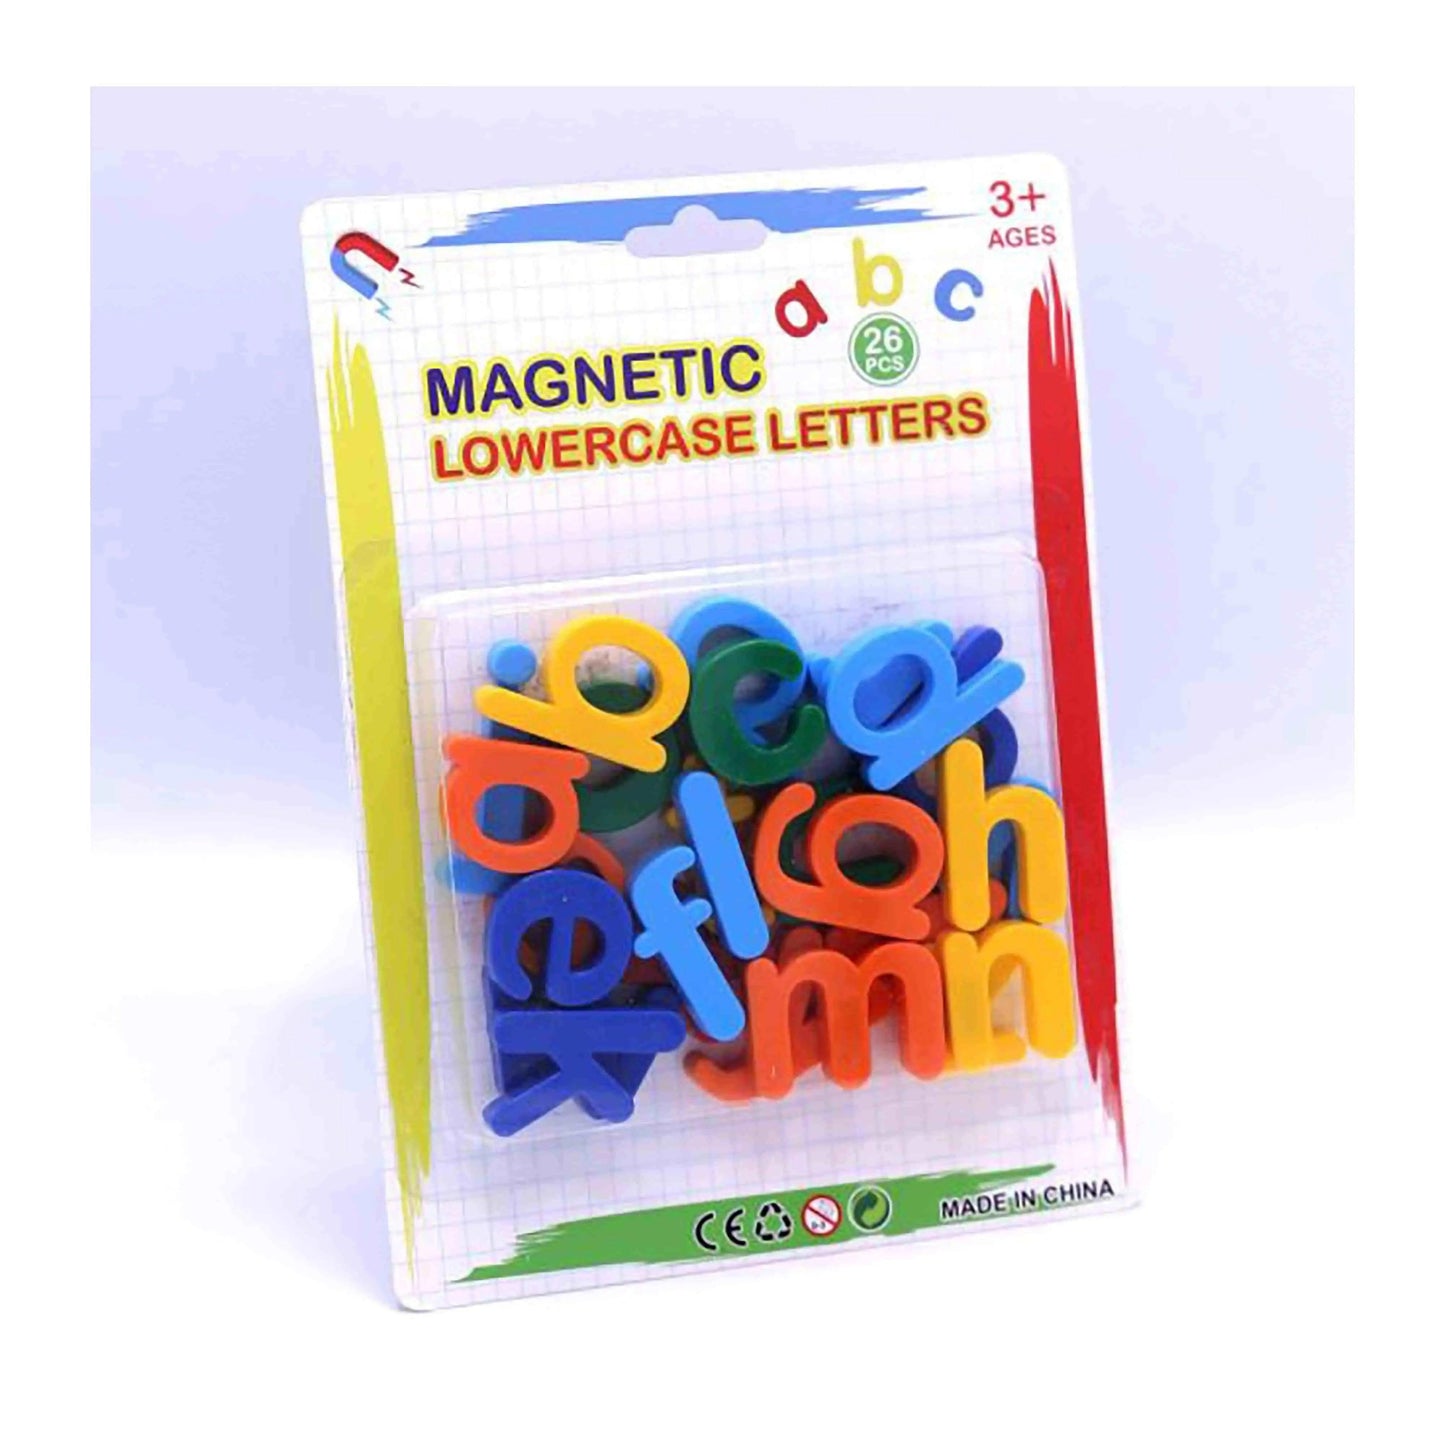 Magnetic Lowercase Letters abc 26 Piece The Stationers